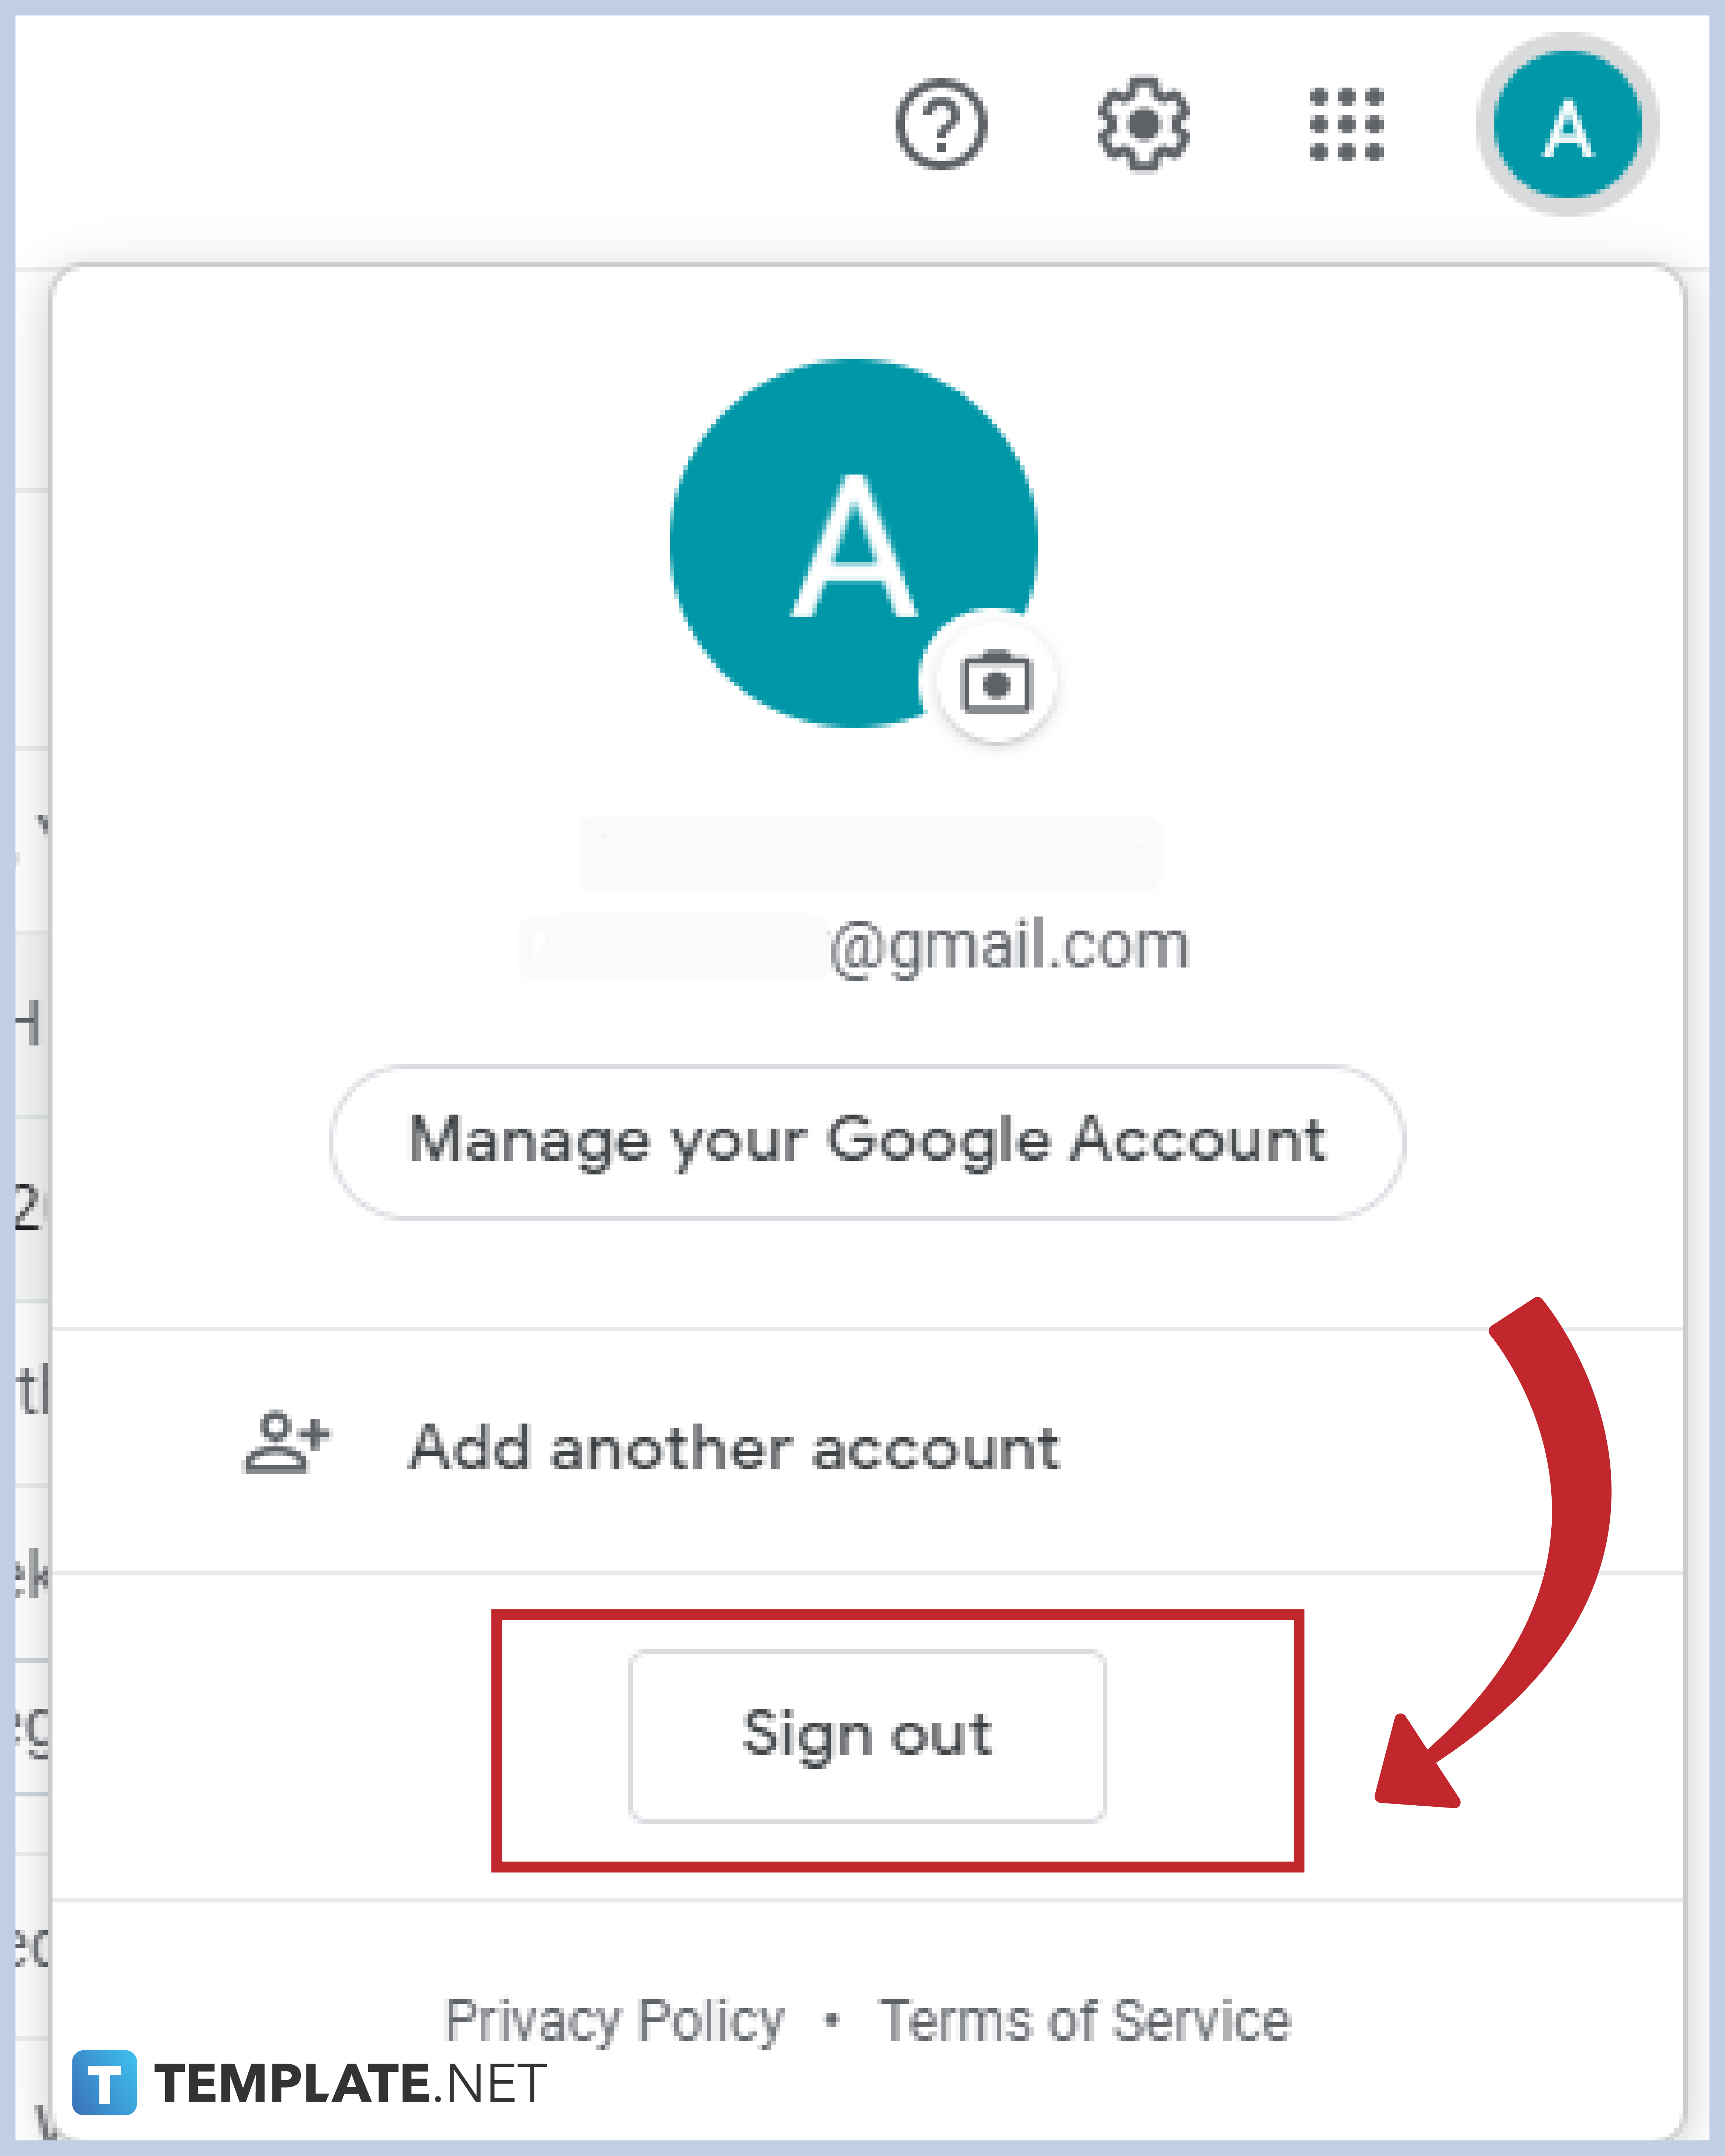 step-3-to-sign-out-click-your-profile-photo-on-your-gmail-in-the-desktop-view-and-log-out-01